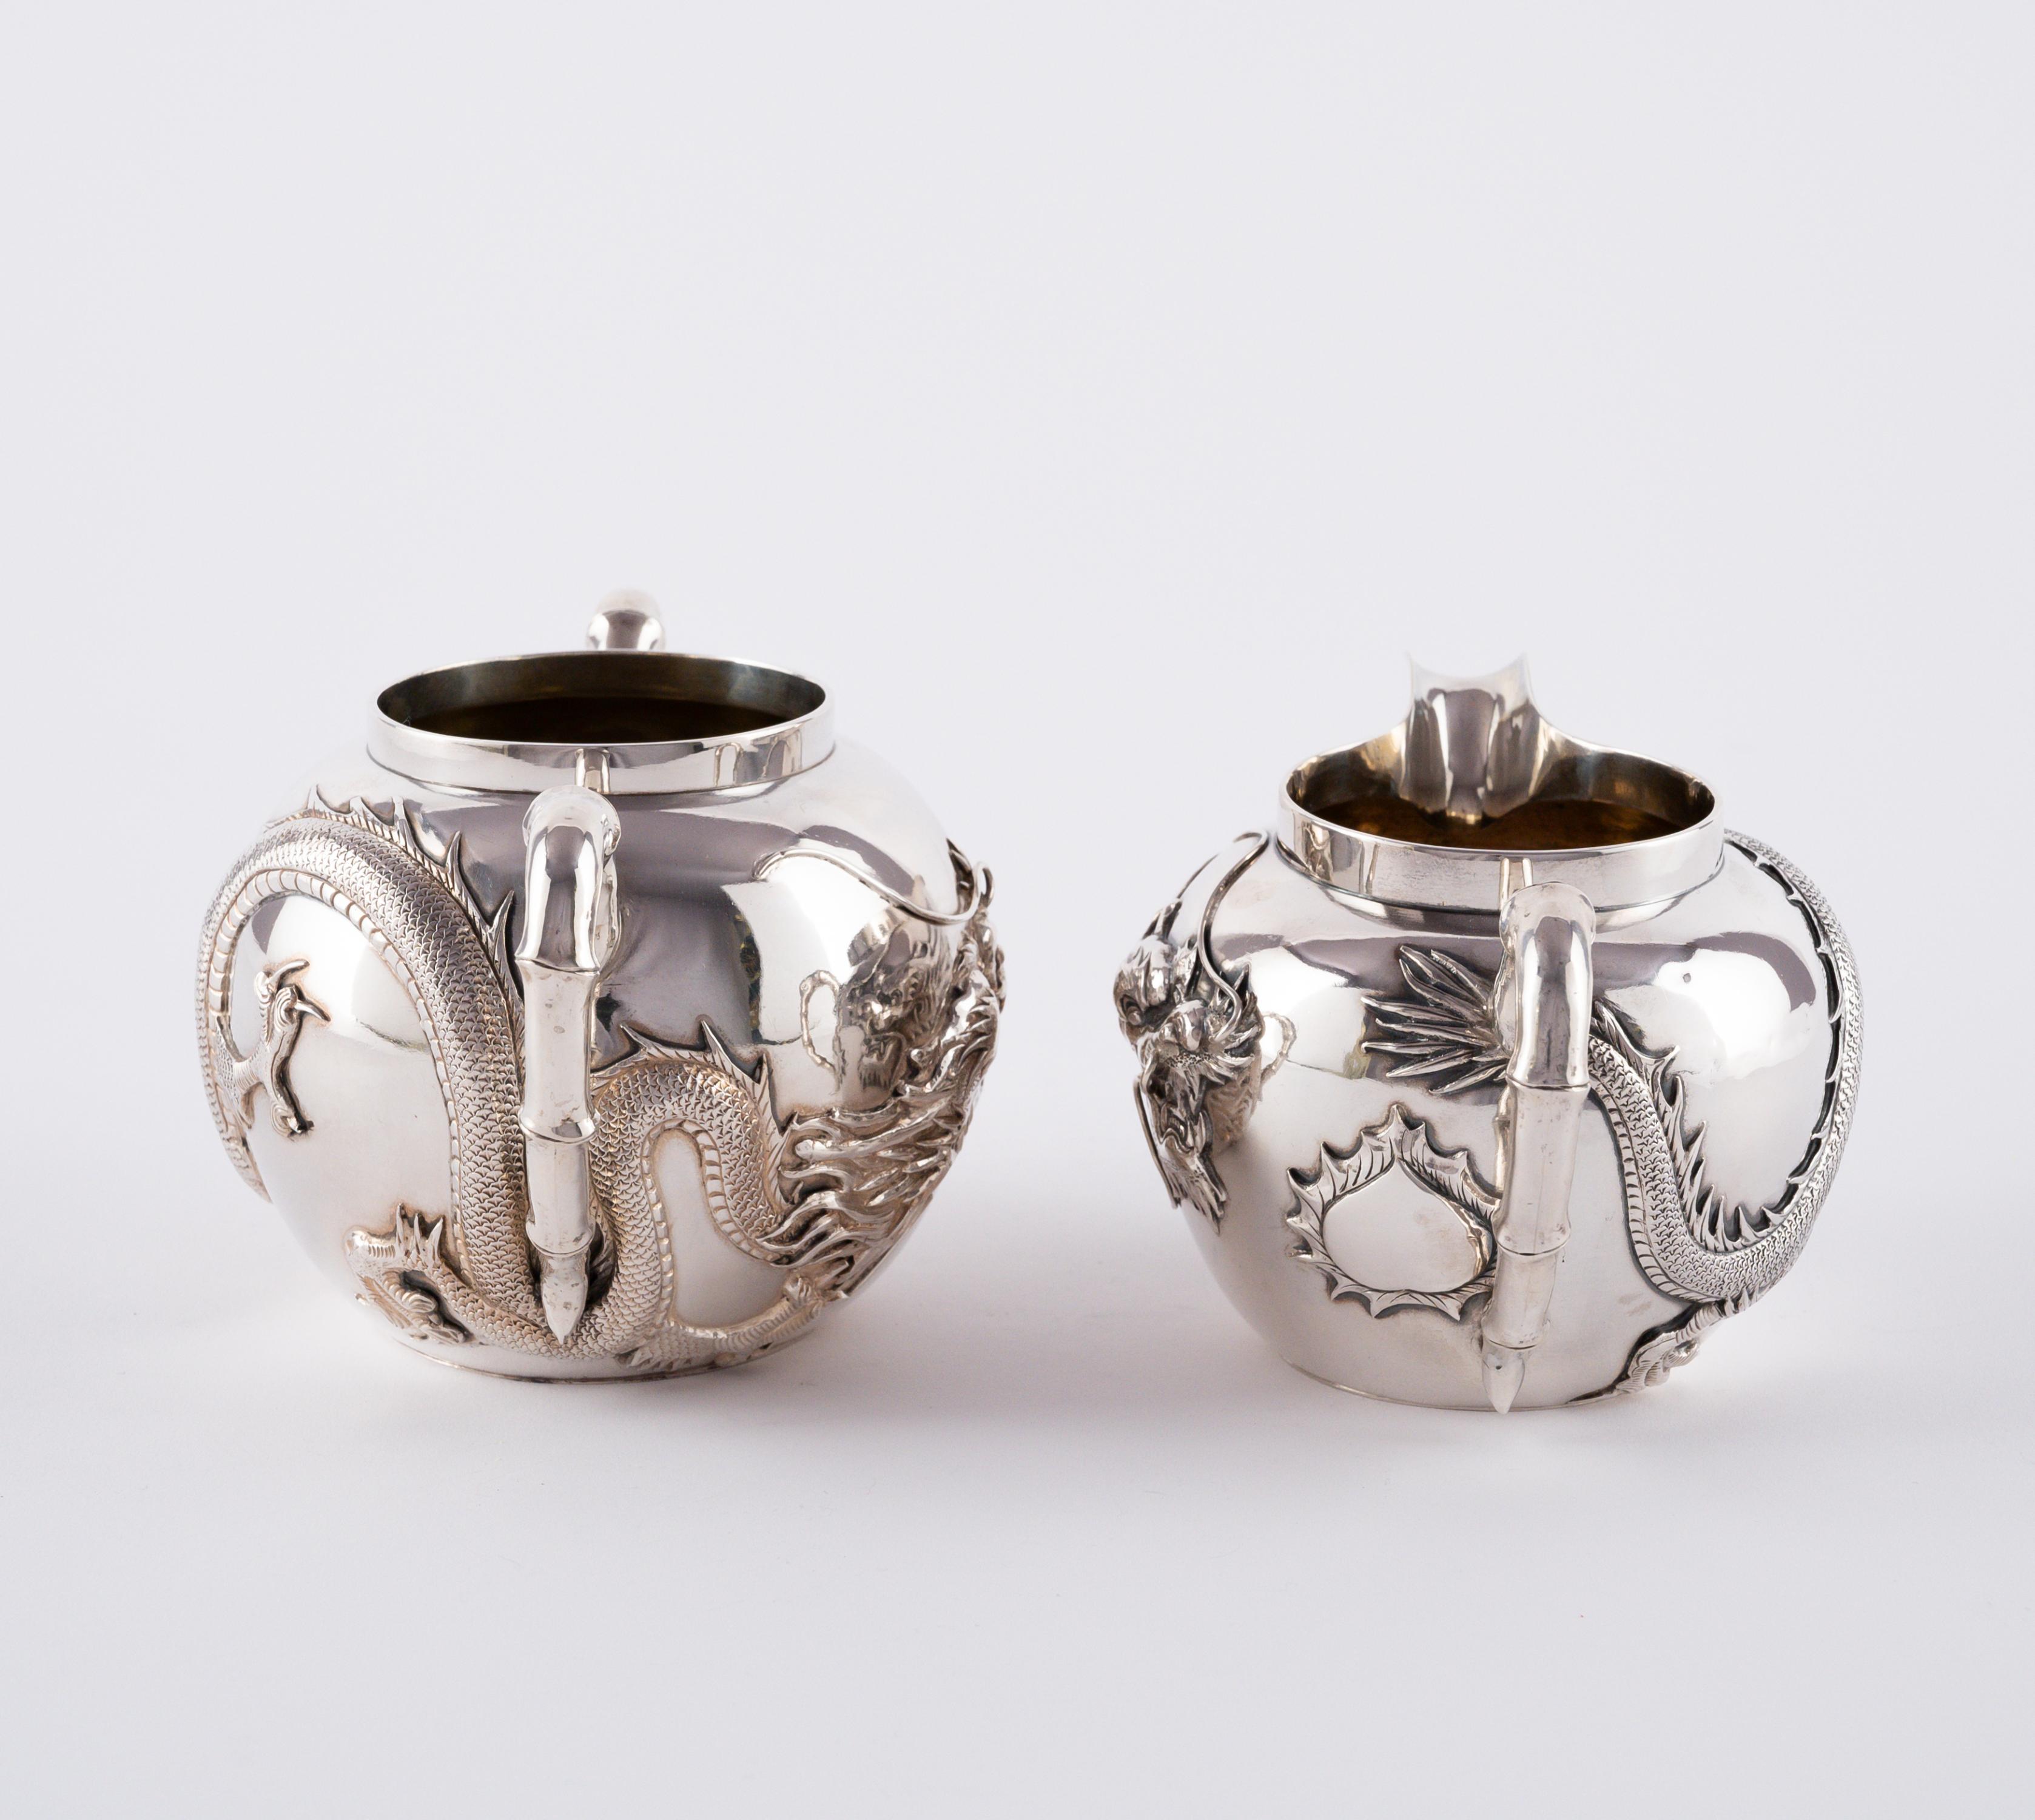 EXCEPTIONAL SILVER TEA SERVICE WITH DRAGON DECORATION - Image 8 of 12